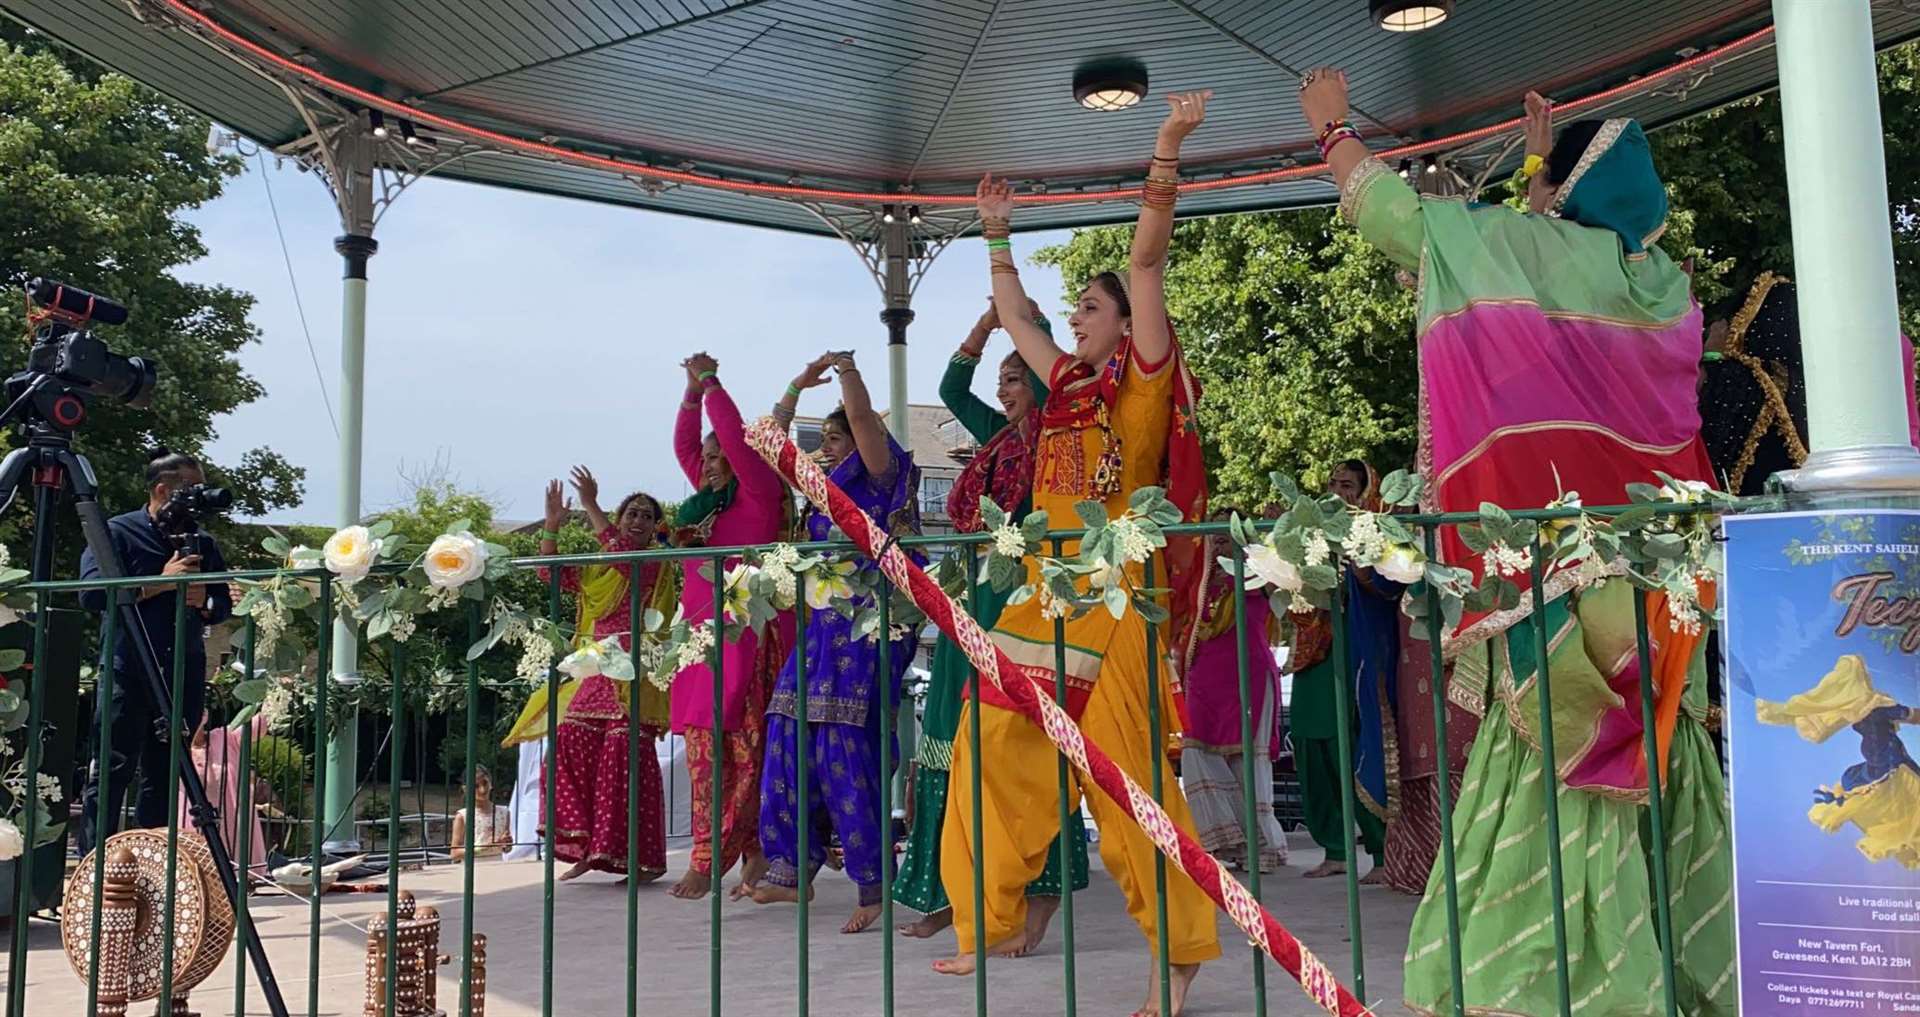 Kent Saheli Group danced Giddha which is a traditional routine performed on special occasions